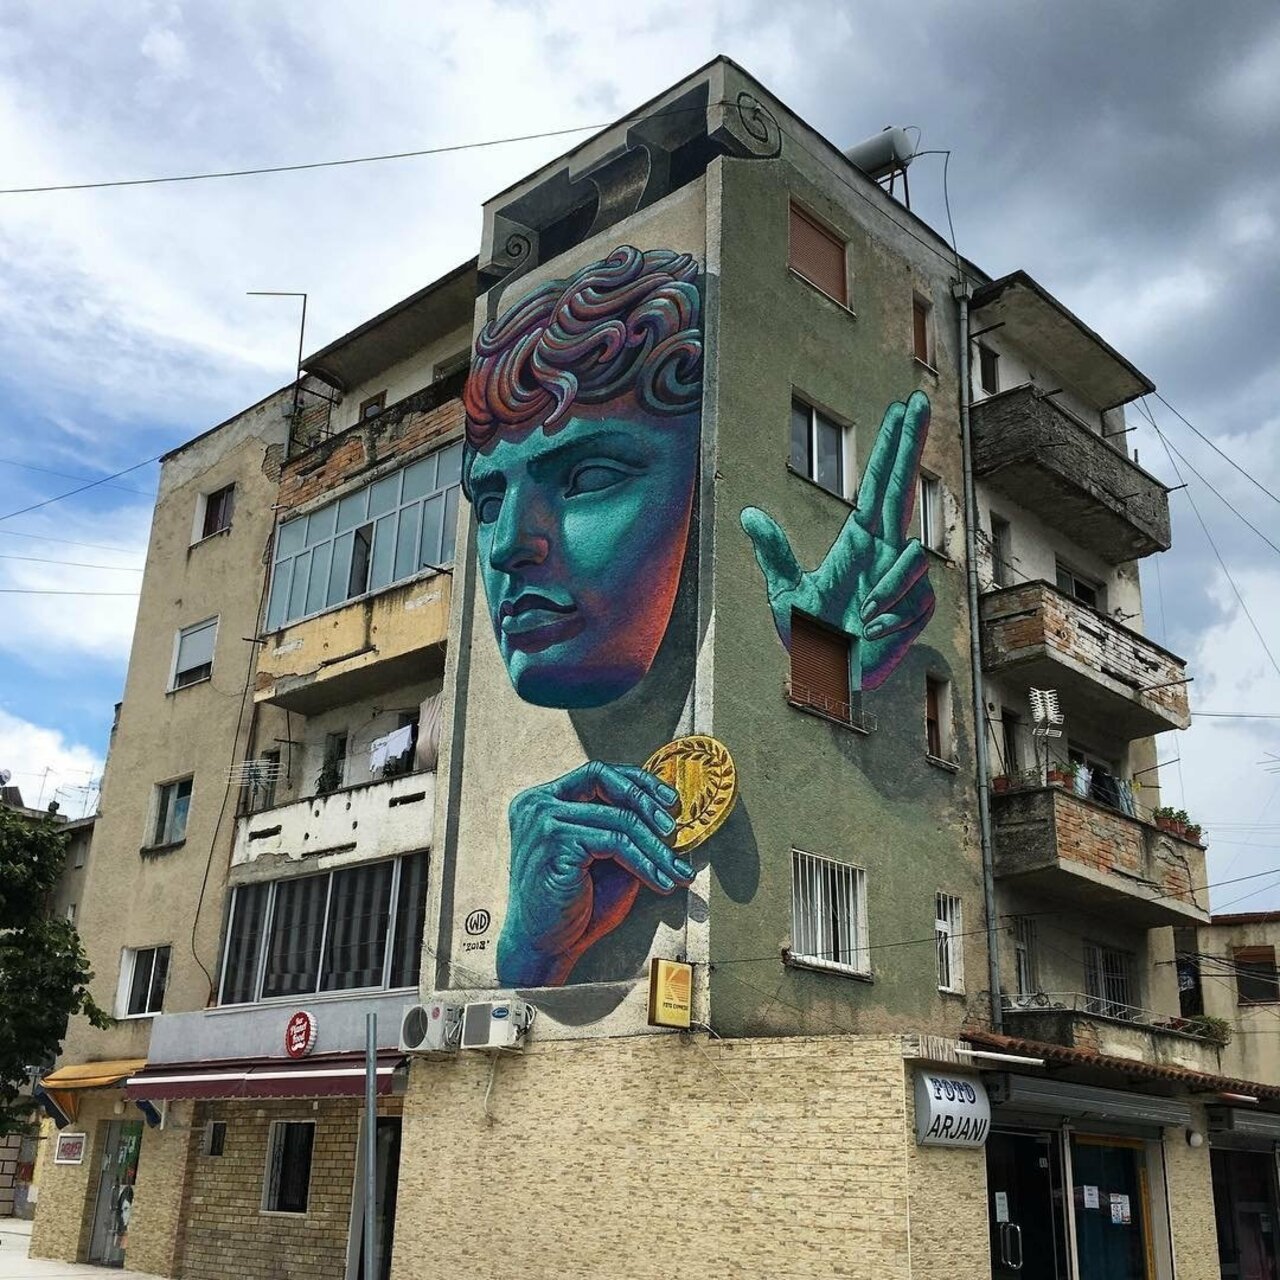 The best streetart of the day: "The Champion" by @ wd_wilddrawing in Ura Vajgurore, Berat, Albania 🇦🇱 . . . #wd_wilddrawing #wdwilddrawing #wdstreetart #UraVajgurore #streetartalbania #albaniastreetart #graffitialbania #albaniagraffiti #streetart #urbanart #graffiti #wallart https://t.co/NPijF3mos7